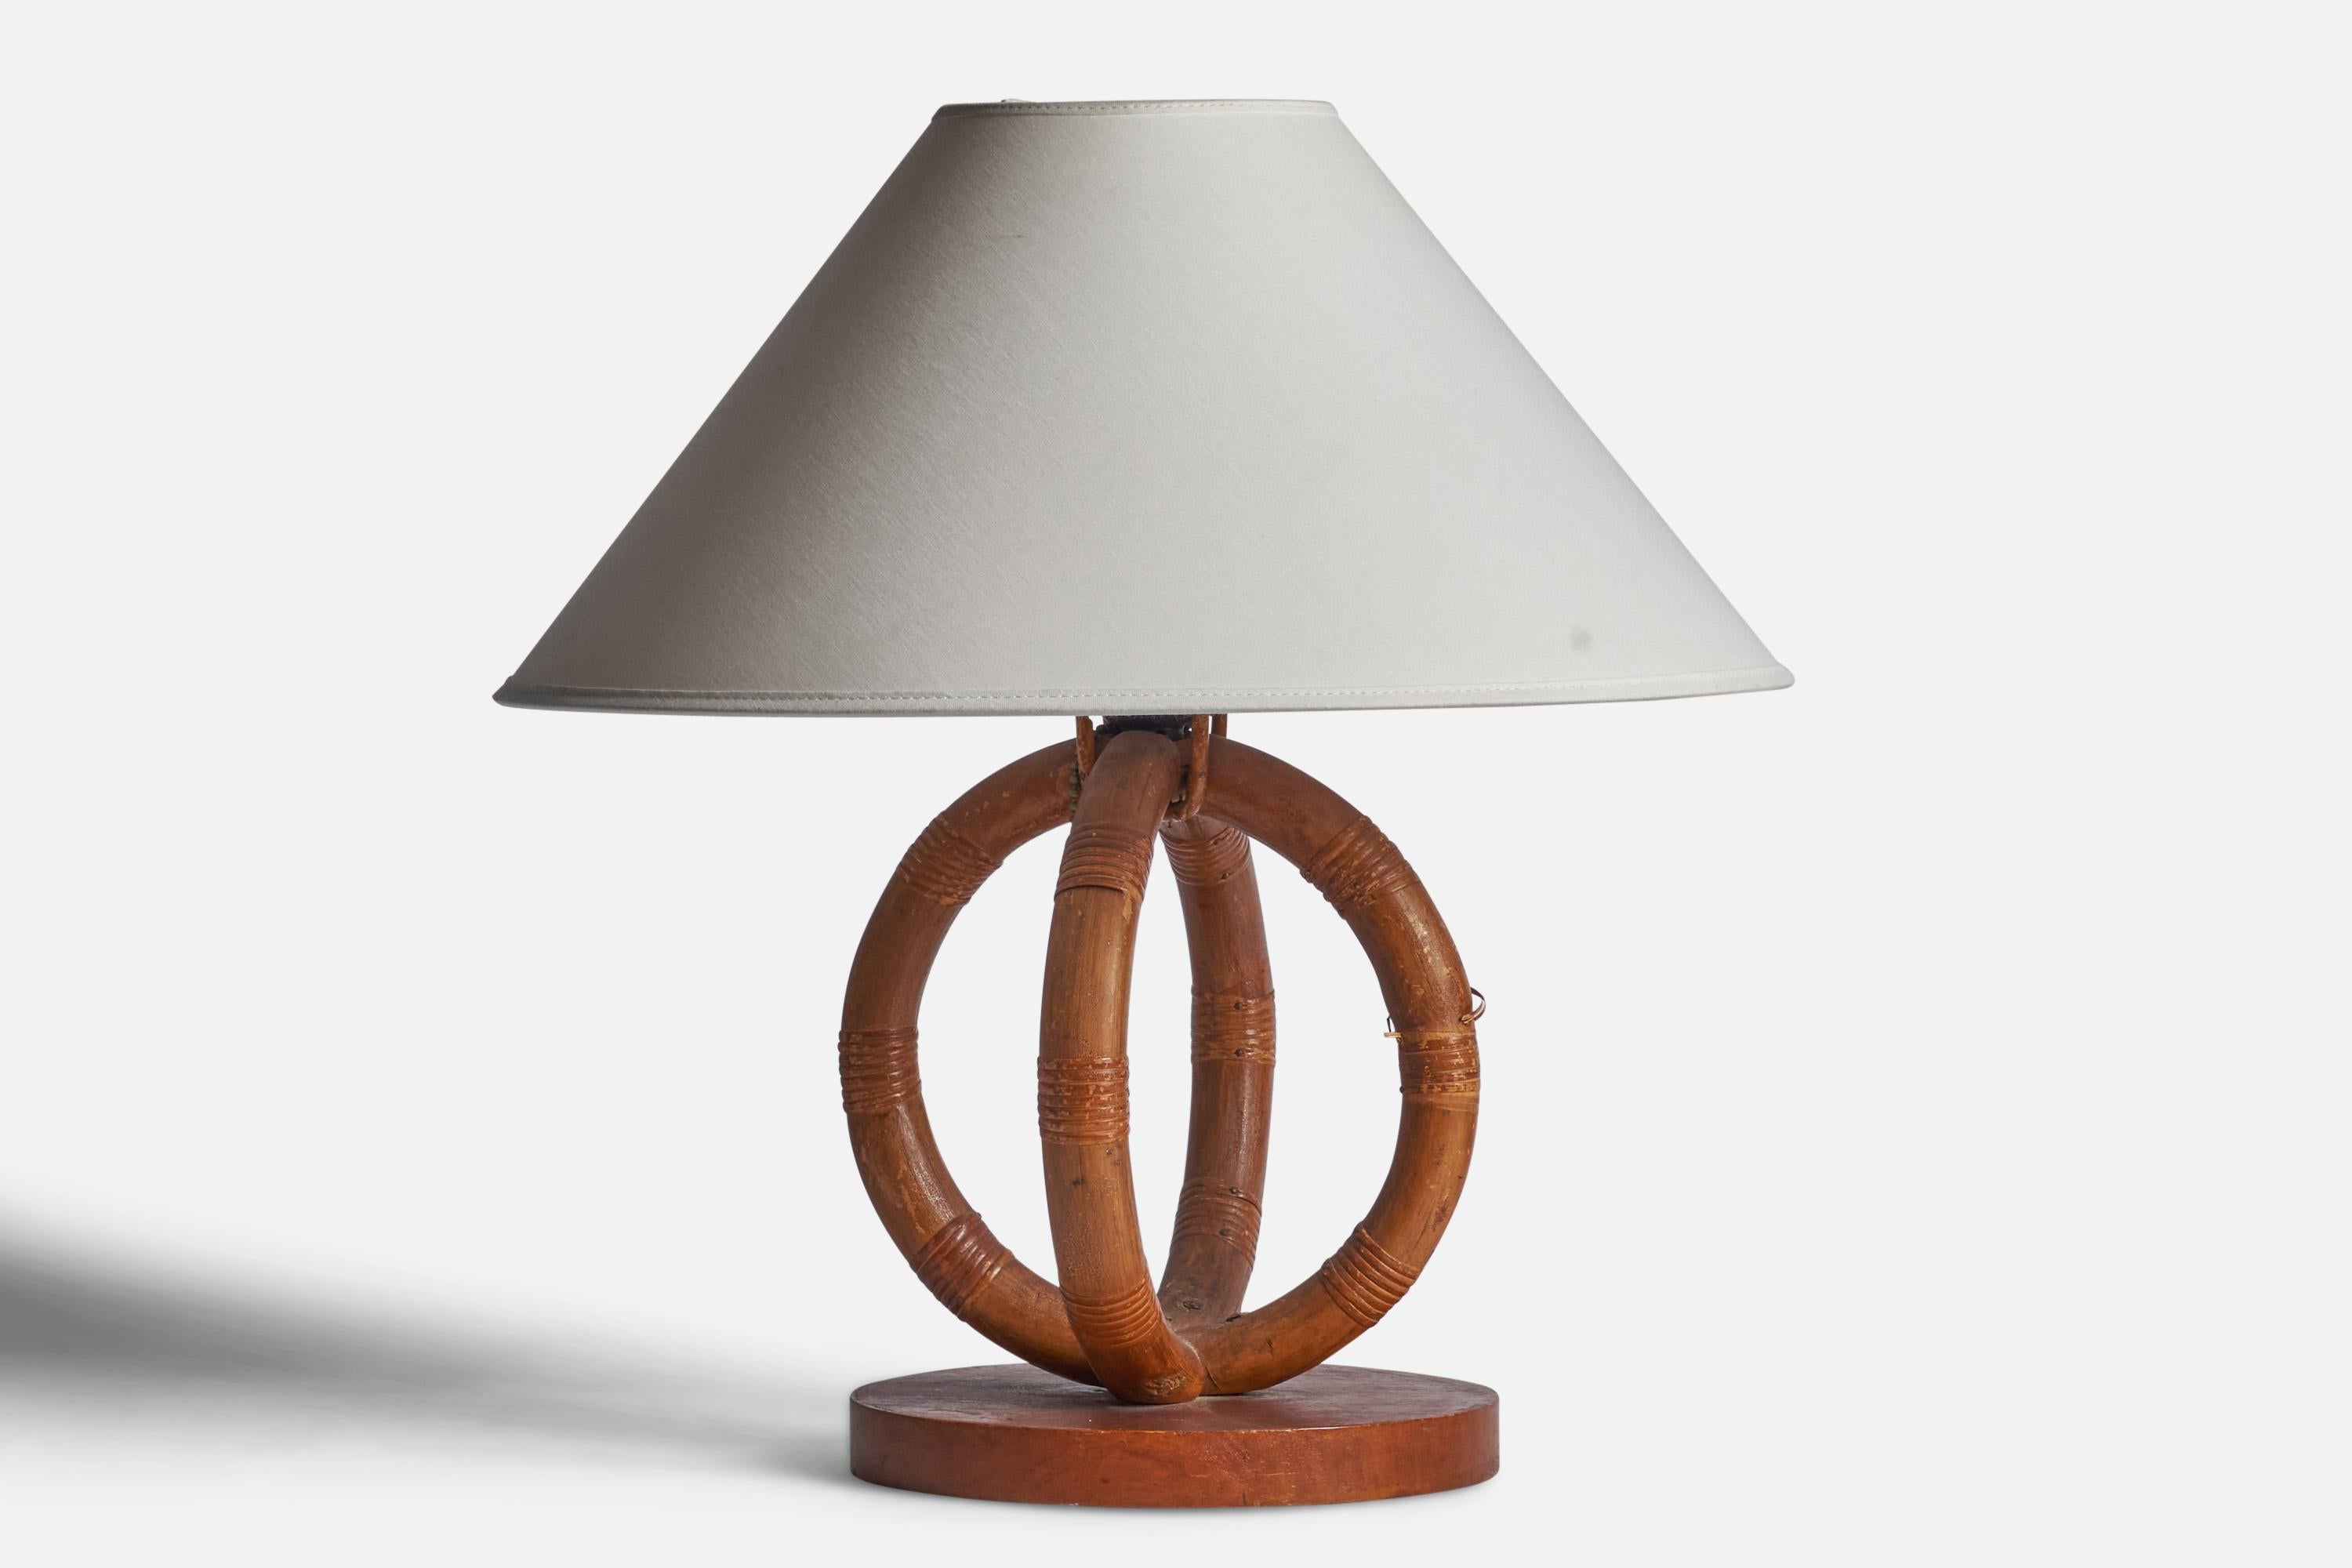 A moulded bamboo, rattan and wood table lamp designed and produced in the US, 1950s.

Dimensions of Lamp (inches): 12” H x 8” Diameter
Dimensions of Shade (inches): 4.5” Top Diameter x 16” Bottom Diameter x 9” H
Dimensions of Lamp with Shade